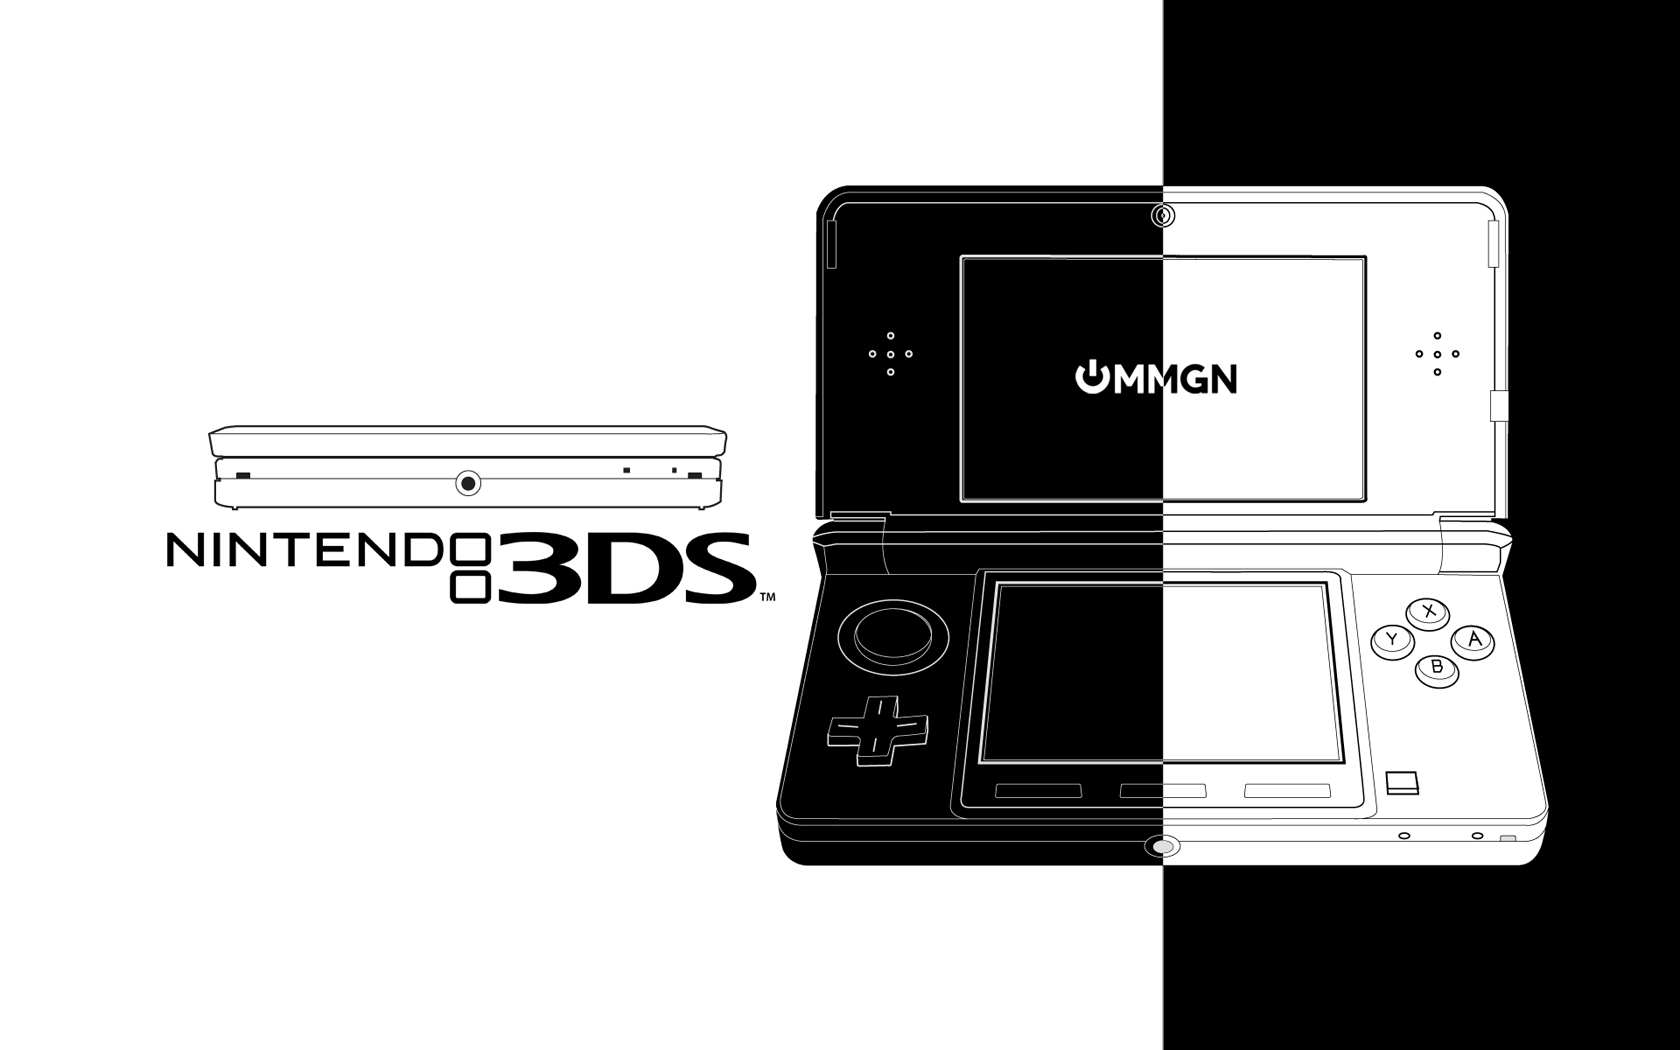 Cool Nintendo 3ds Wallpaper From Mmgn And All Credit Goes To Them